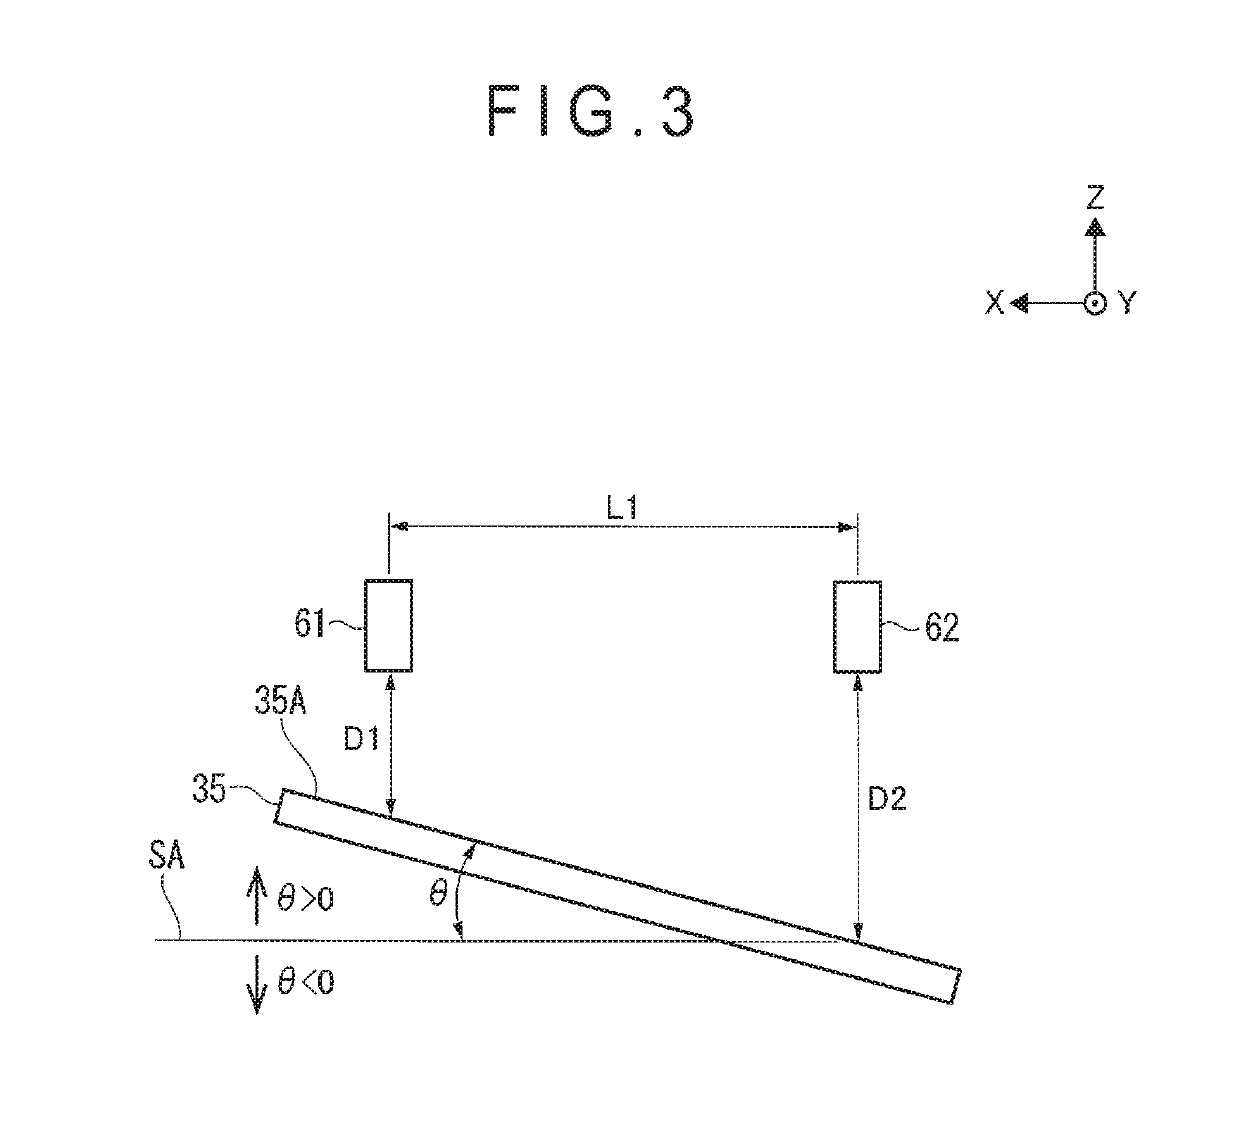 Grinding apparatus and grinding method